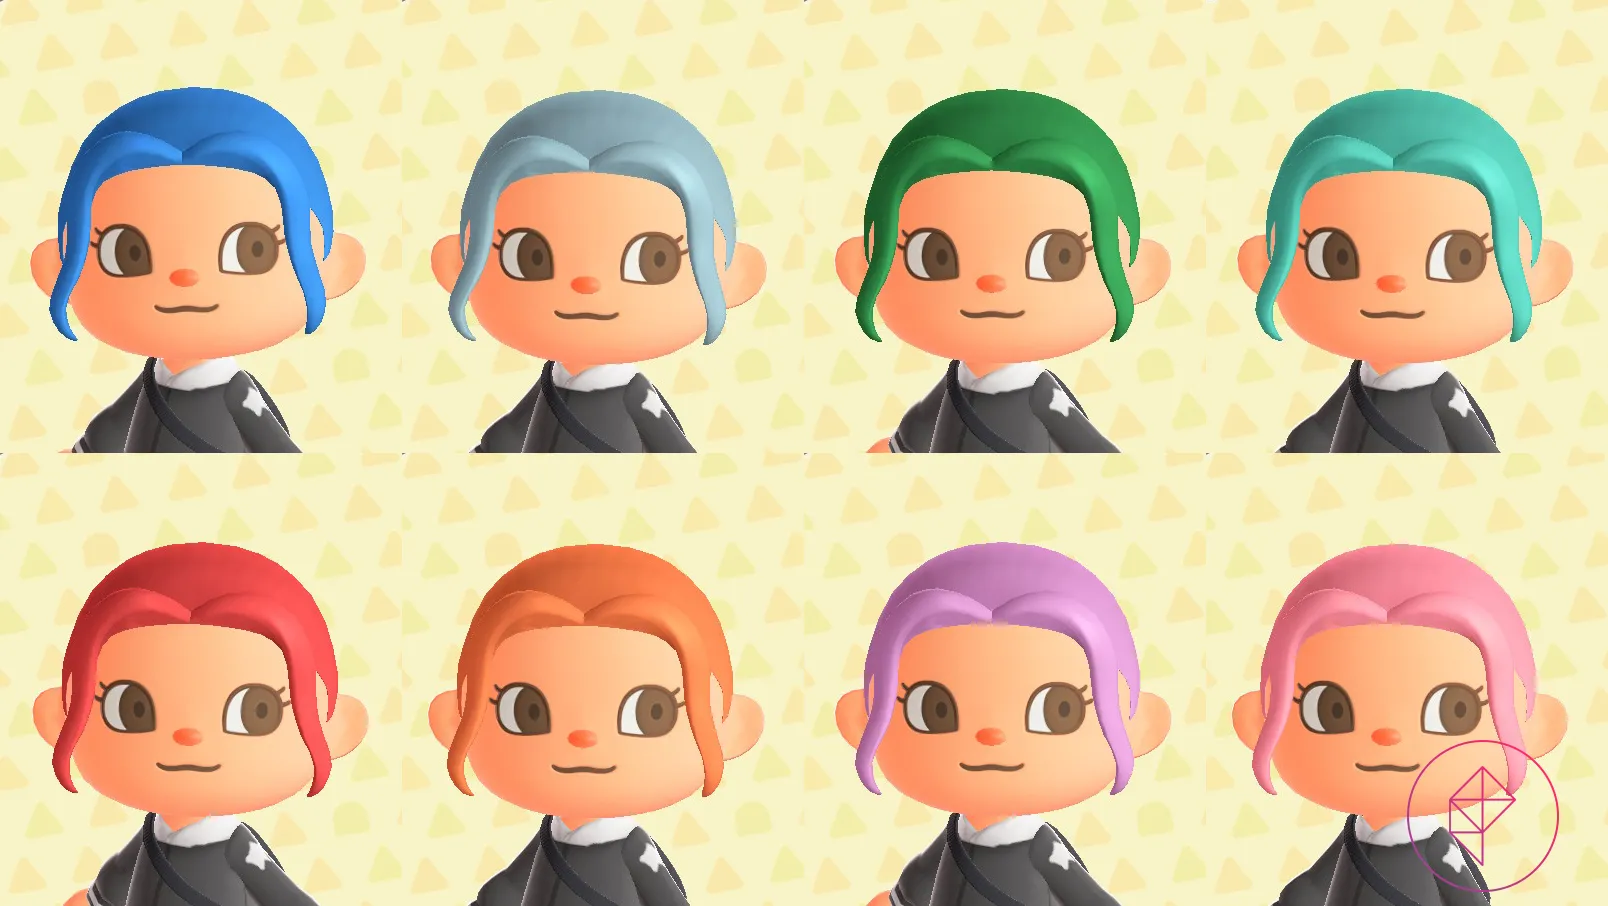 ANIMAL CROSSING: NEW HORIZONS TOP 8 STYLISH HAIR COLORS (3,000 NOOK MILES)